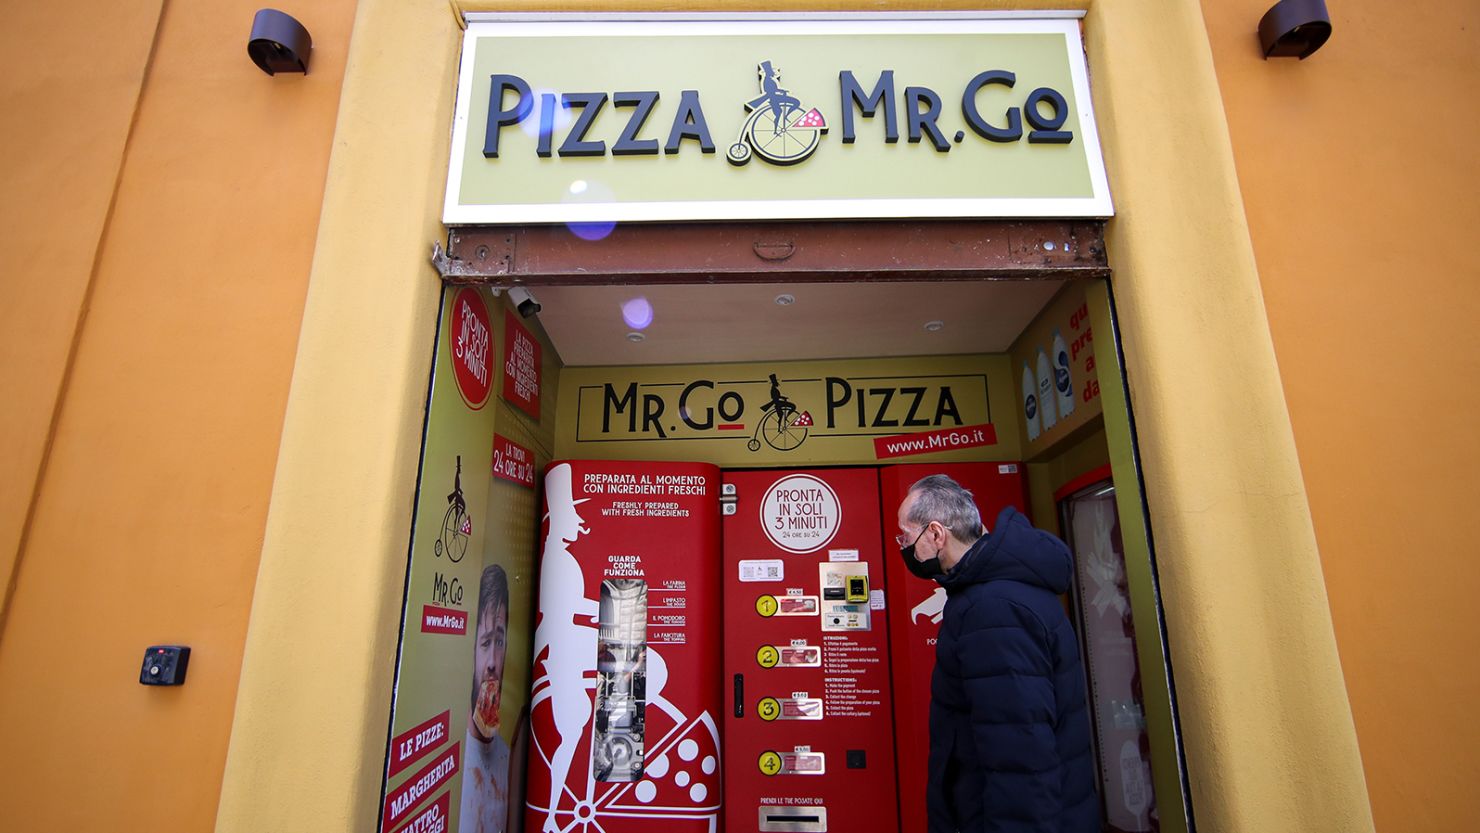 Claudio Zampiga waits for his order at the first automatic pizza vending machine, which is capable of kneading, seasoning and cooking the pizza in three minutes, in Rome, Italy, May 6, 2021. REUTERS/Yara Nardi